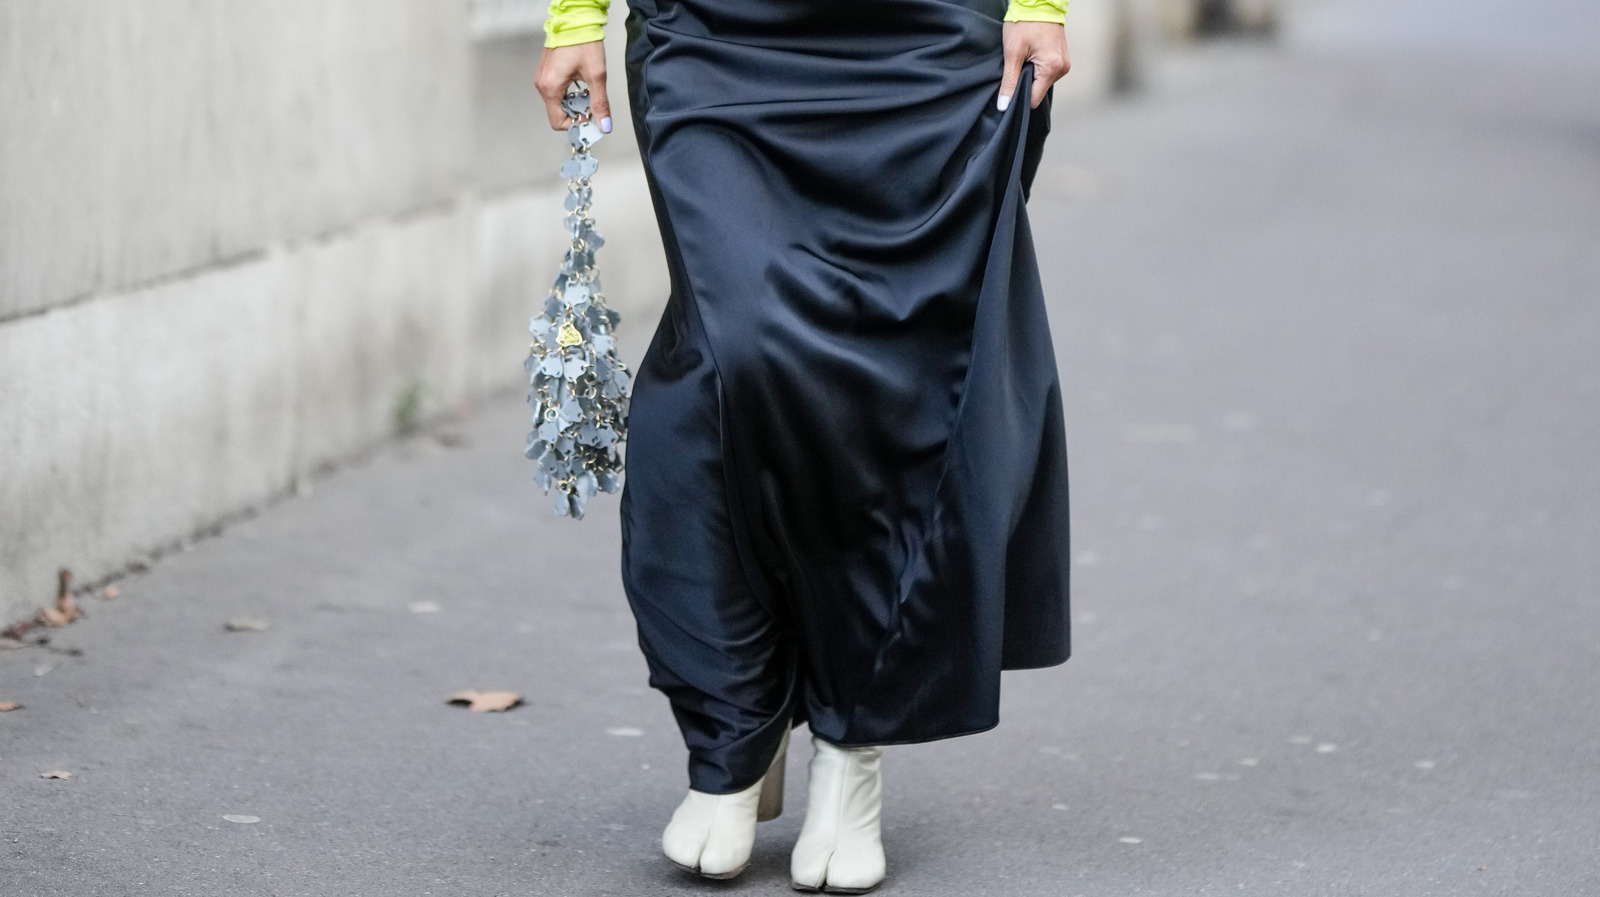 https://www.thelist.com/img/gallery/how-to-wear-trendy-maxi-skirts-when-youre-petite/l-intro-1682344929.jpg